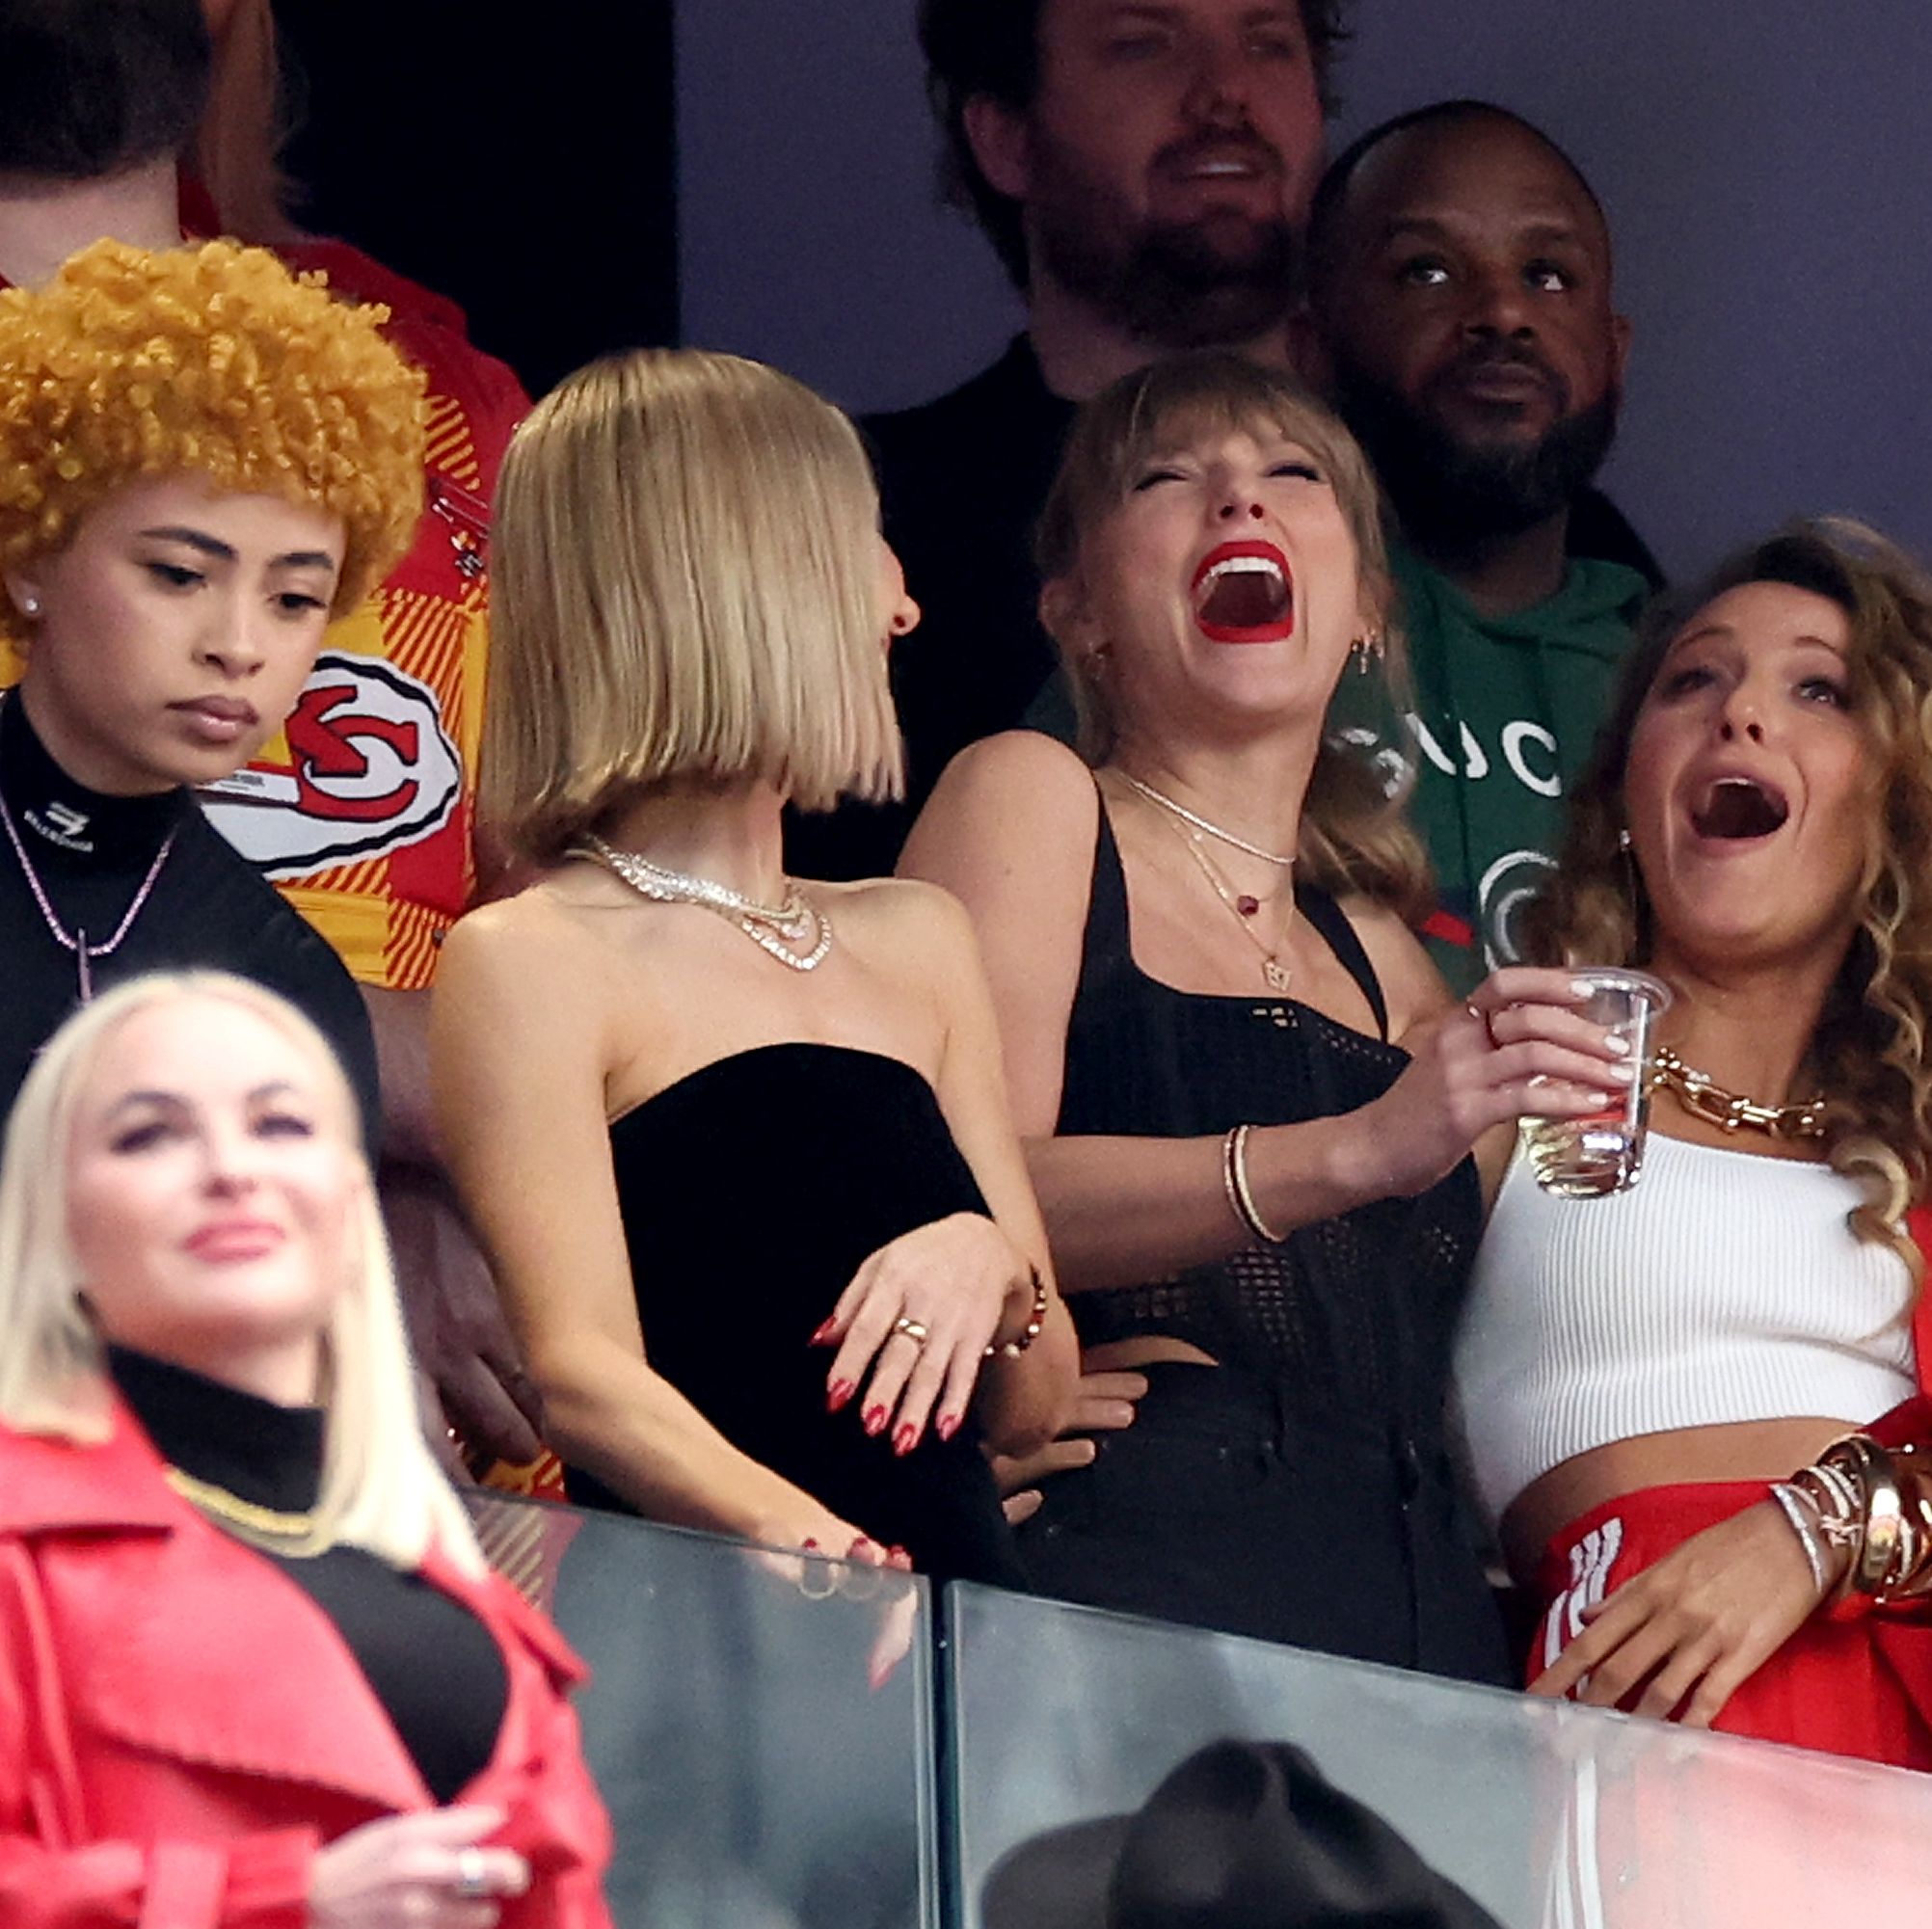 Taylor Swift and Blake Lively Had the Best Reaction to Being Caught on Camera